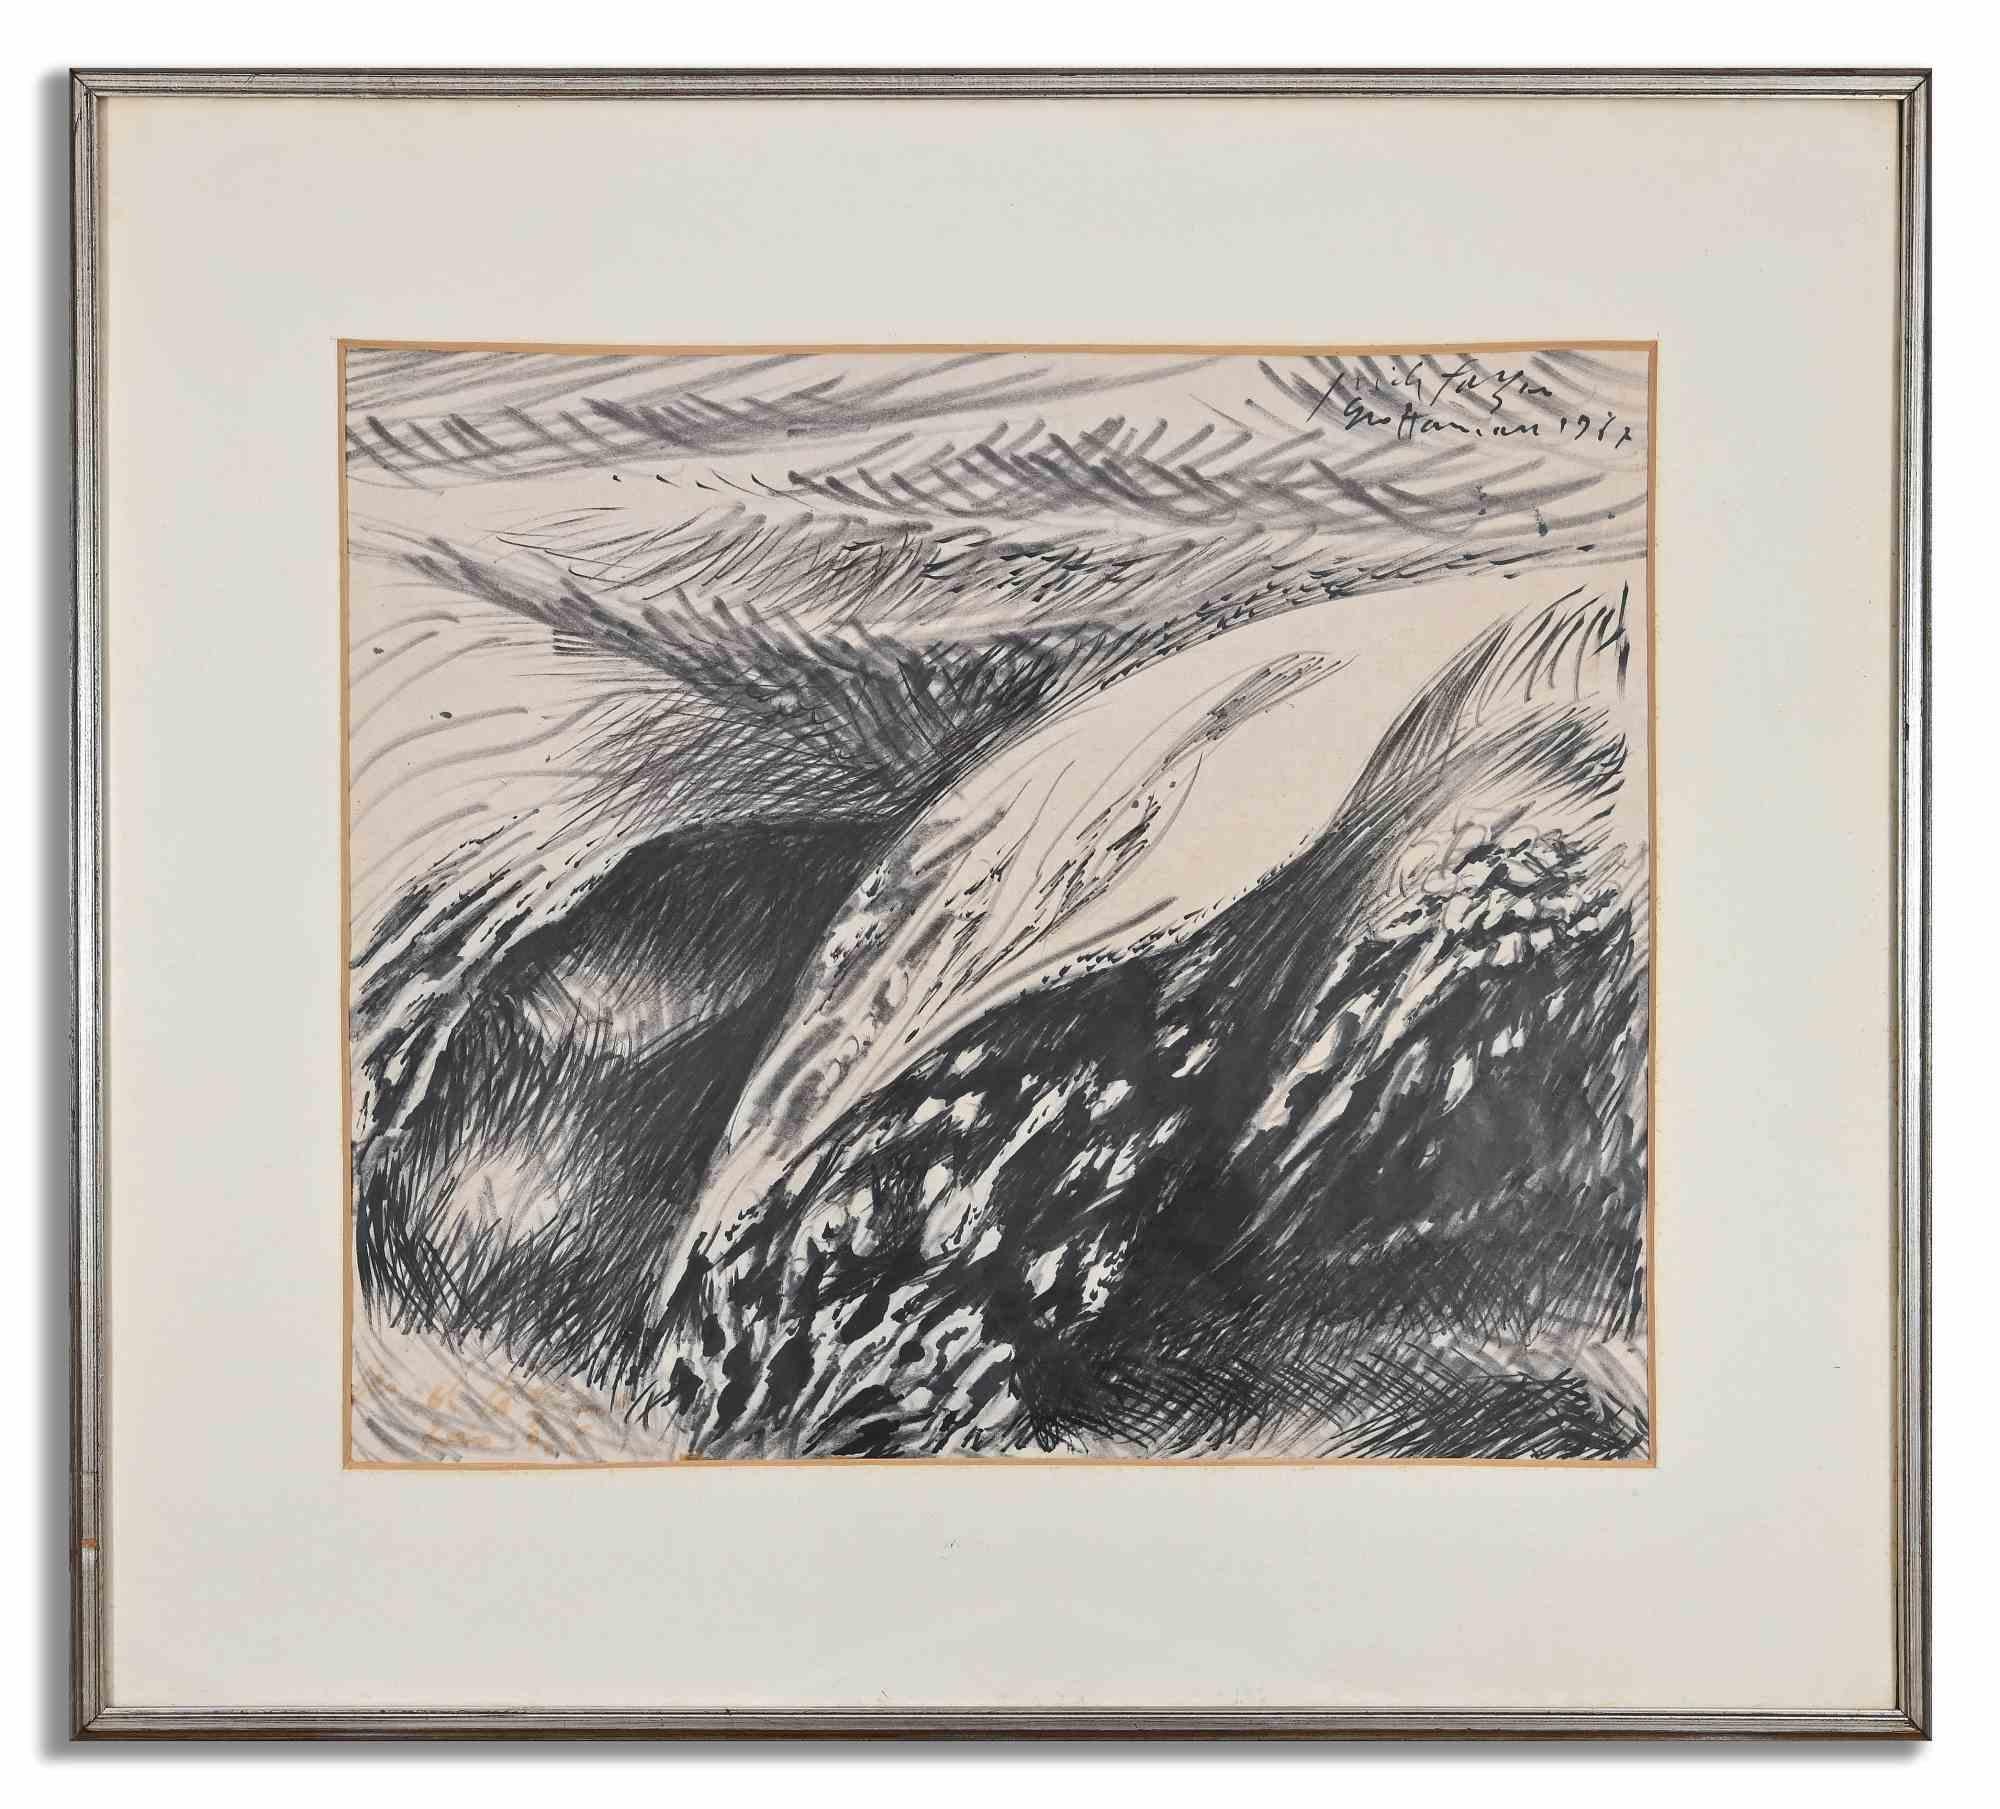 Black and white Field -  Drawing by Pericle Fazzini - 1977